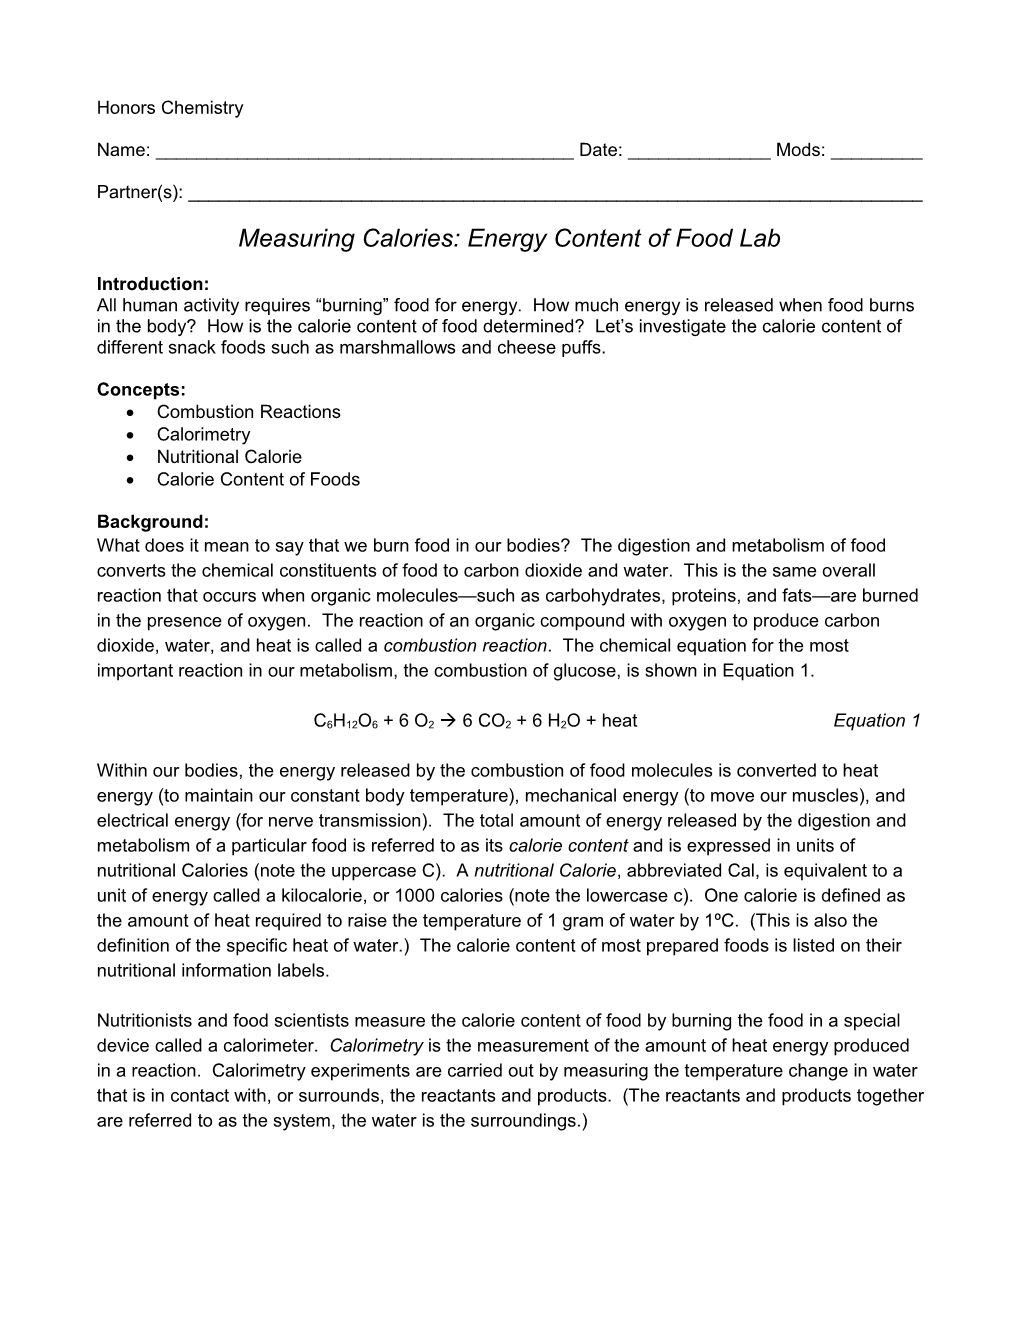 Measuring Calories: Energy Content of Food Lab